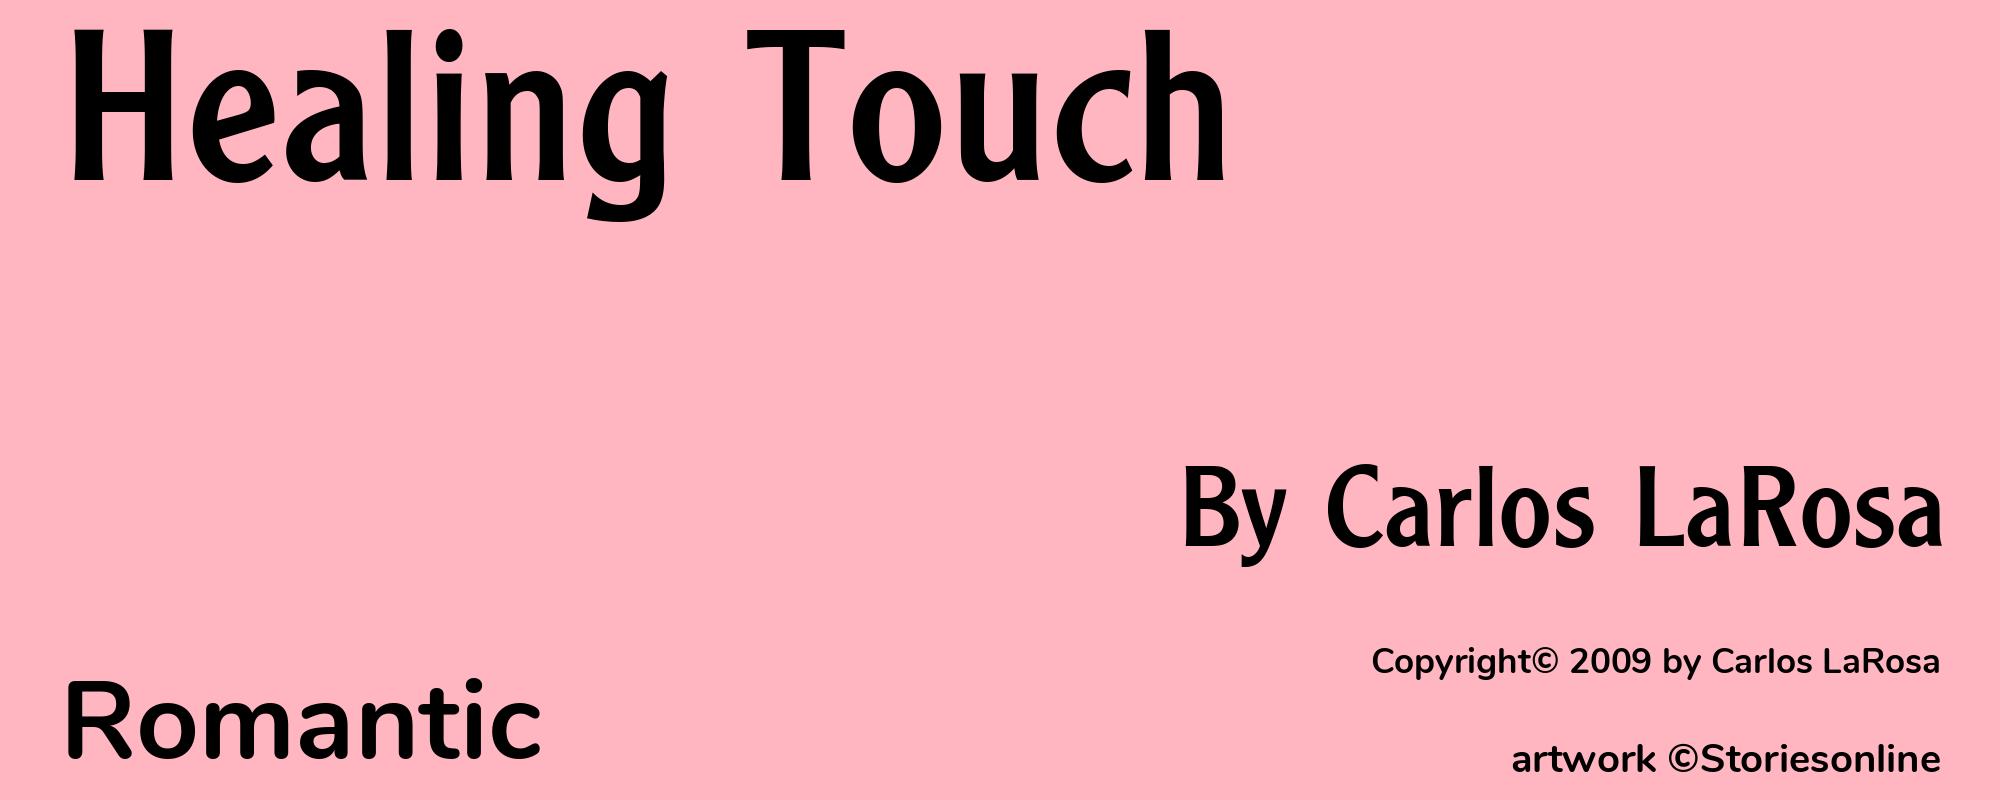 Healing Touch - Cover